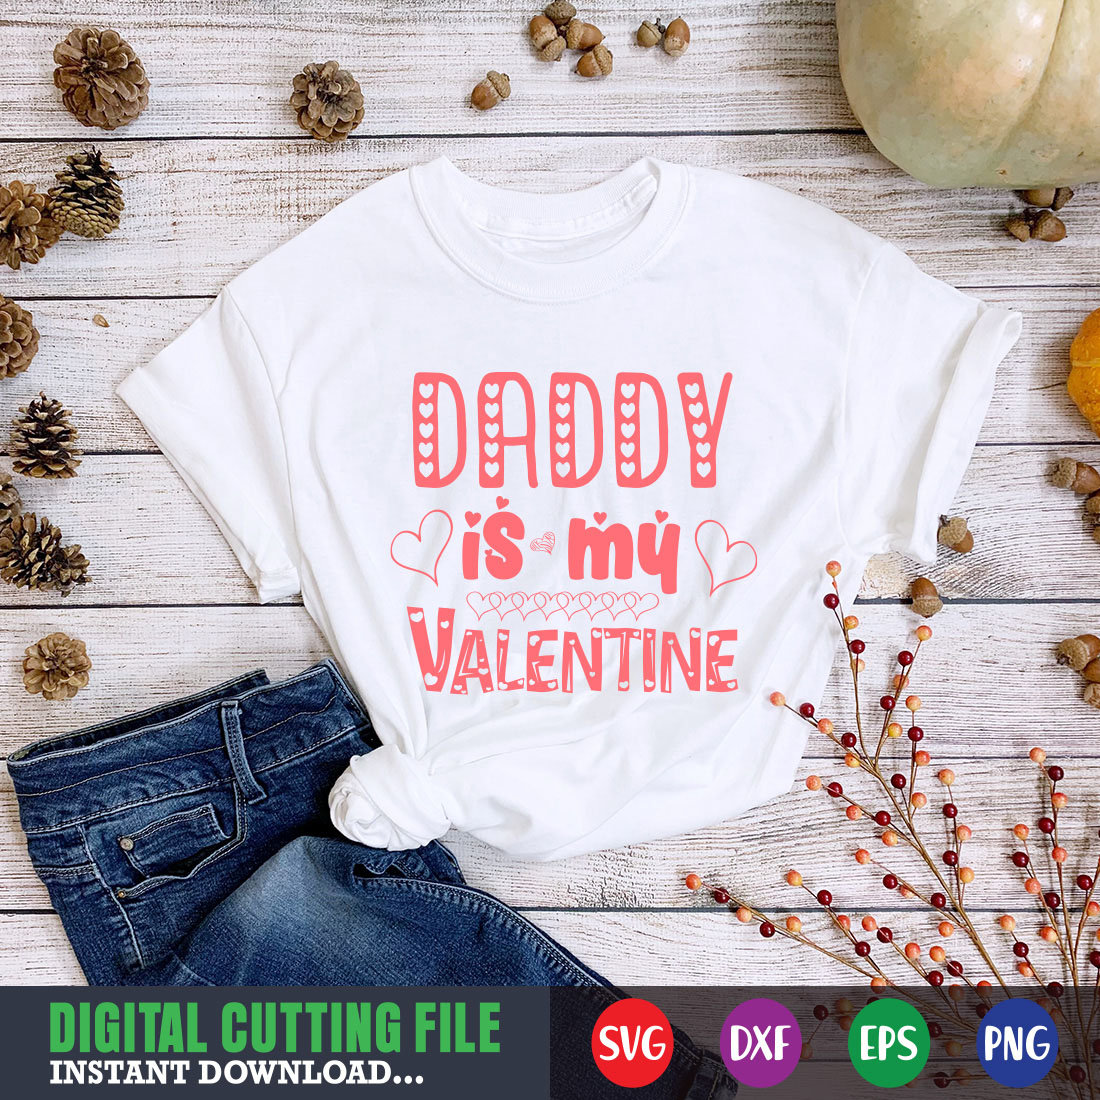 Daddy is My Valentine T-shirt image cover.